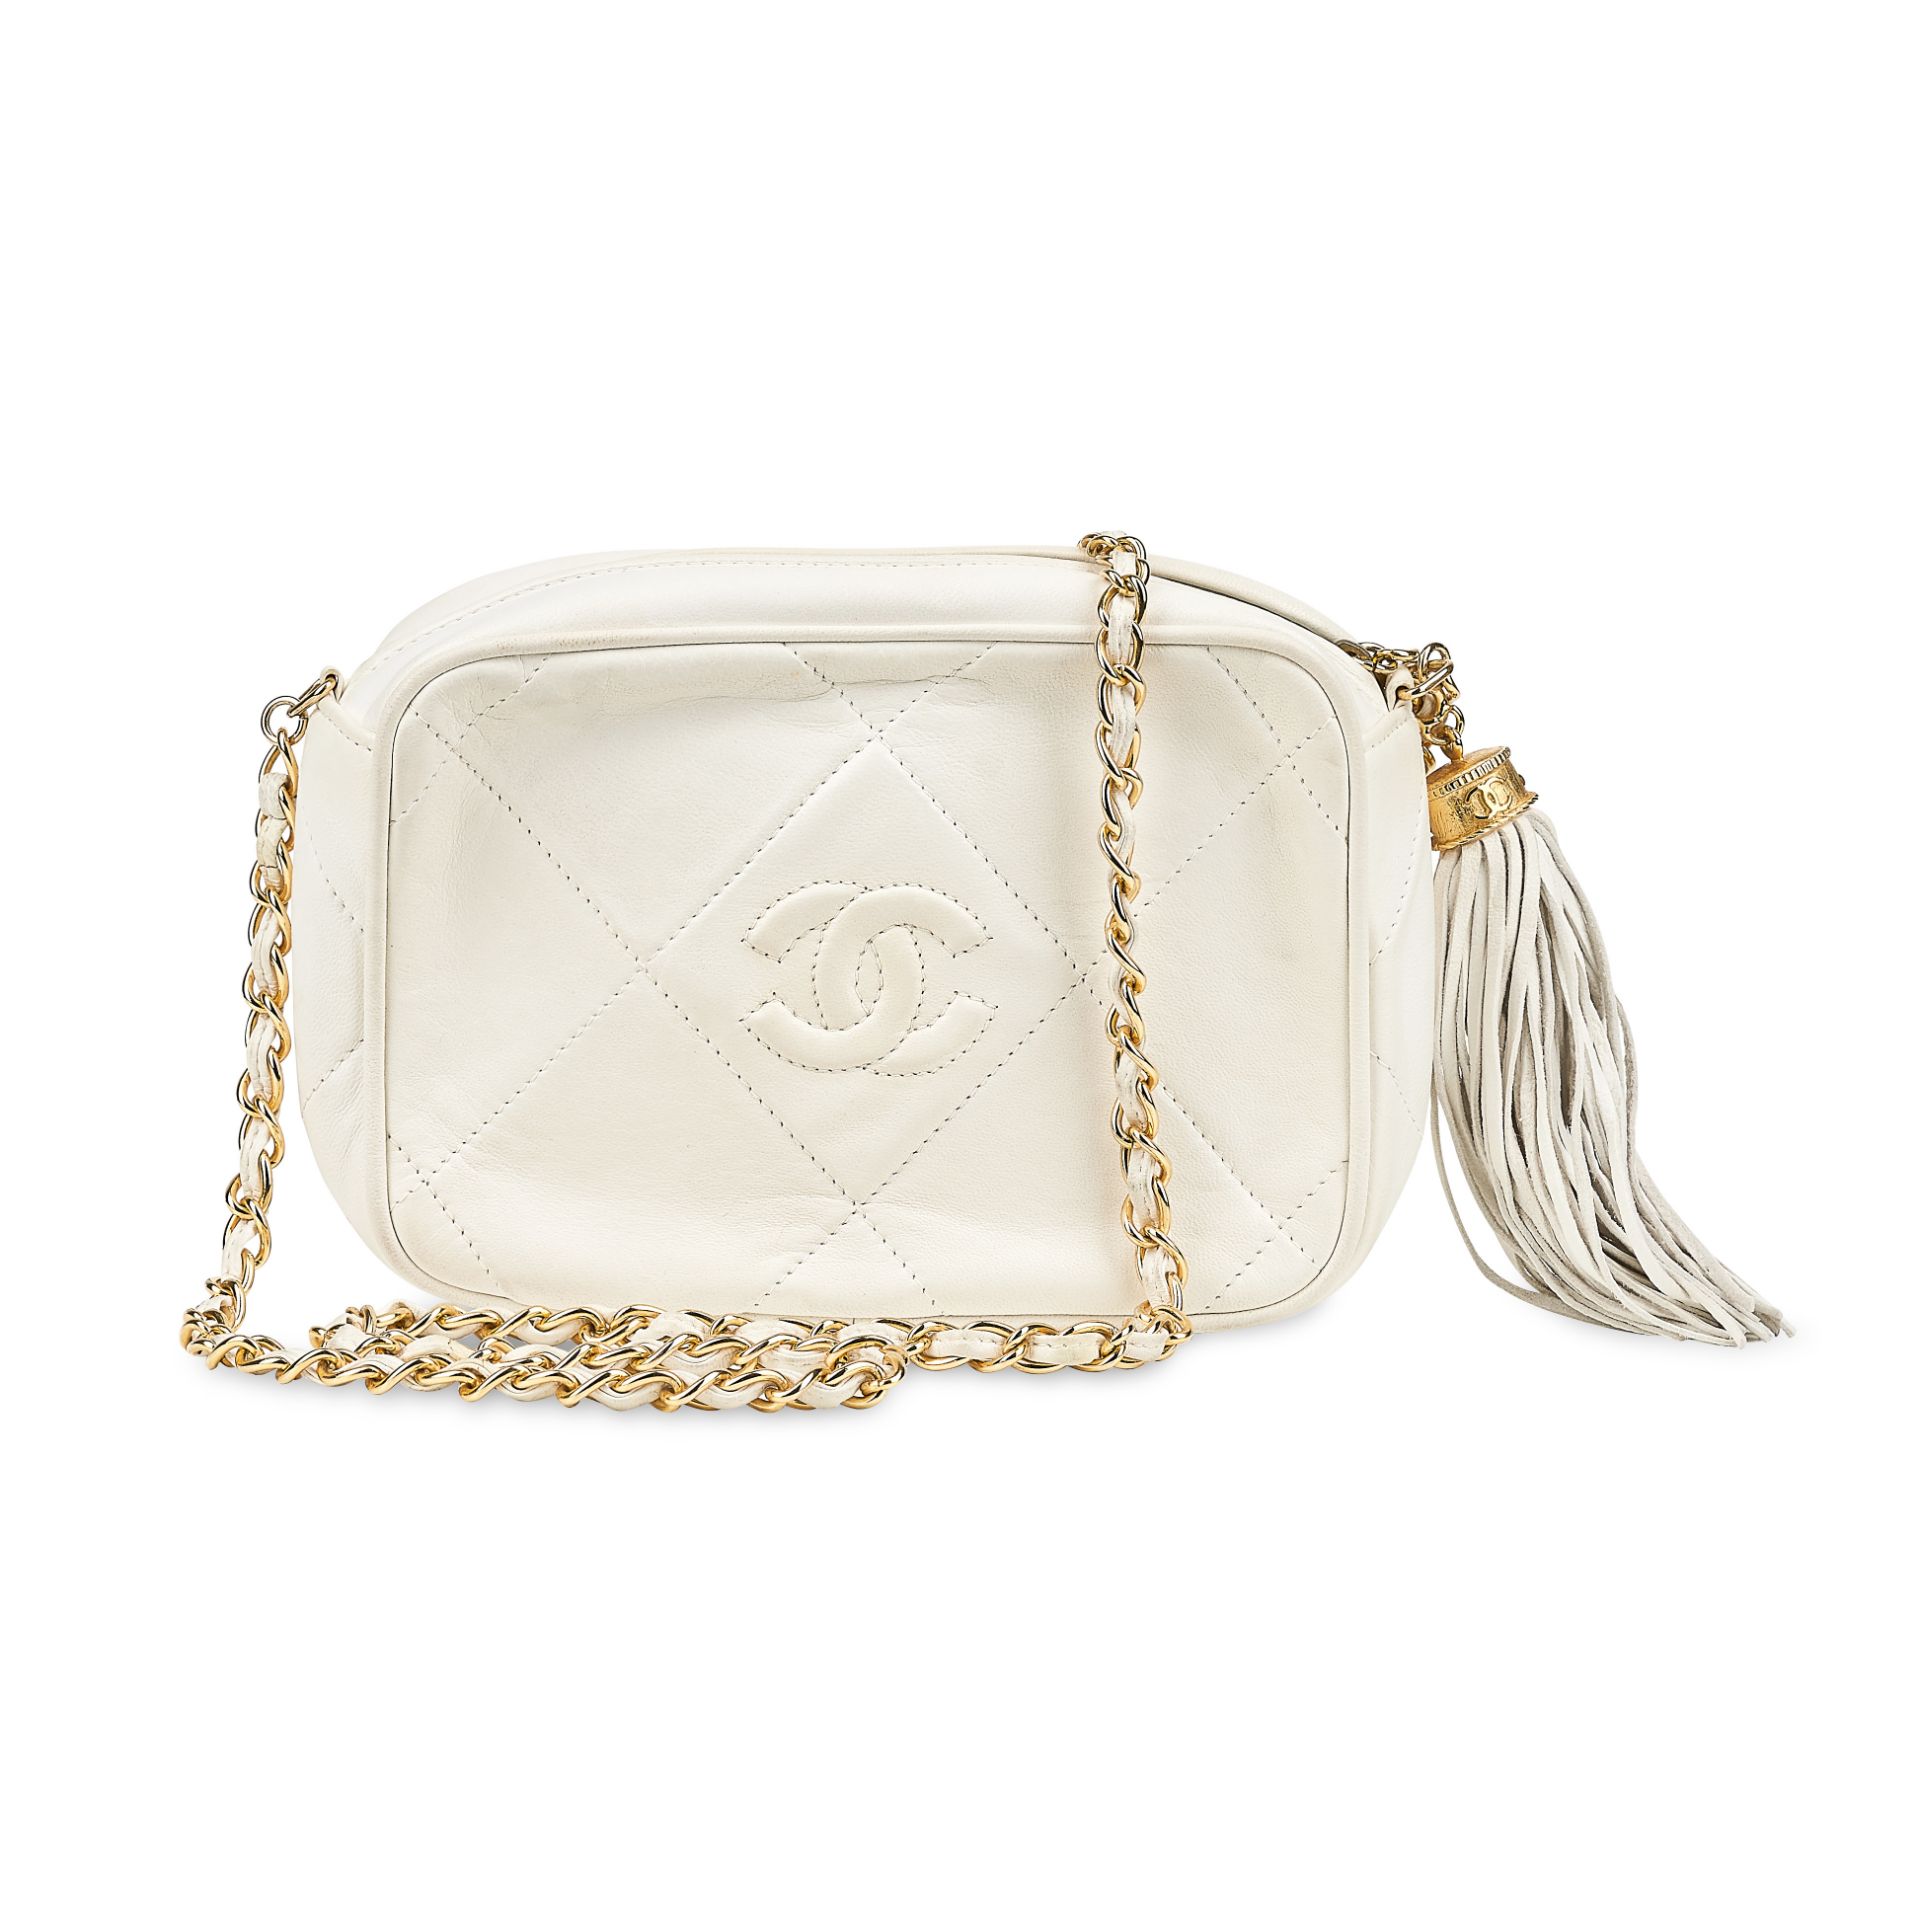 CHANEL, A WHITE VINTAGE CAMERA BAG, Condition grade B. Produced between 1986-1988 - Image 3 of 7